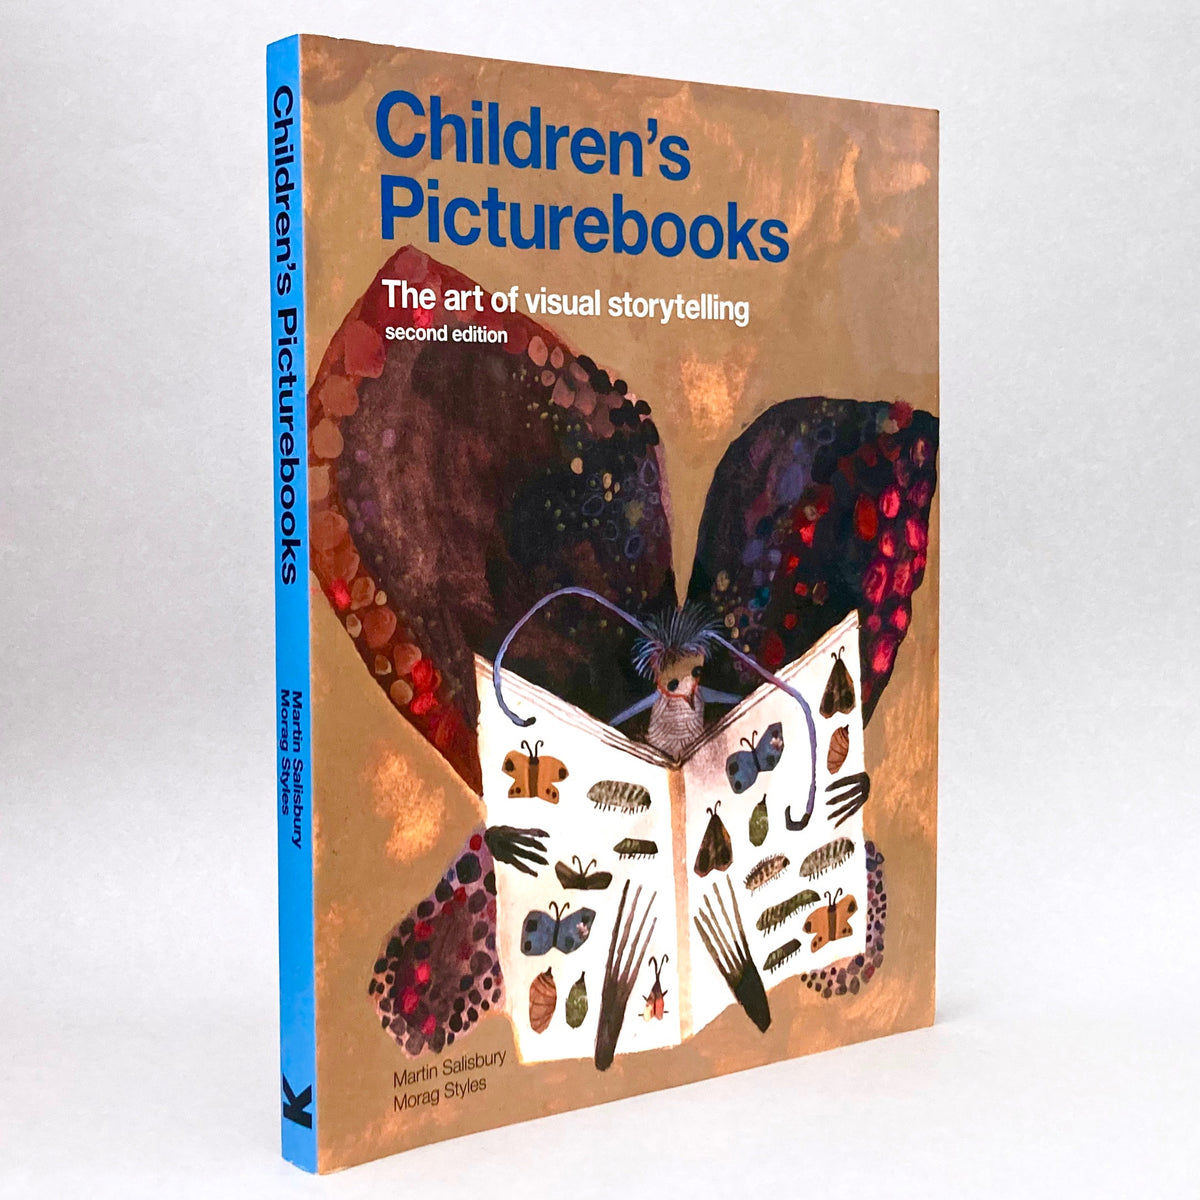 Children's Picturebooks: The Art of Visual Storytelling (Second Edition)